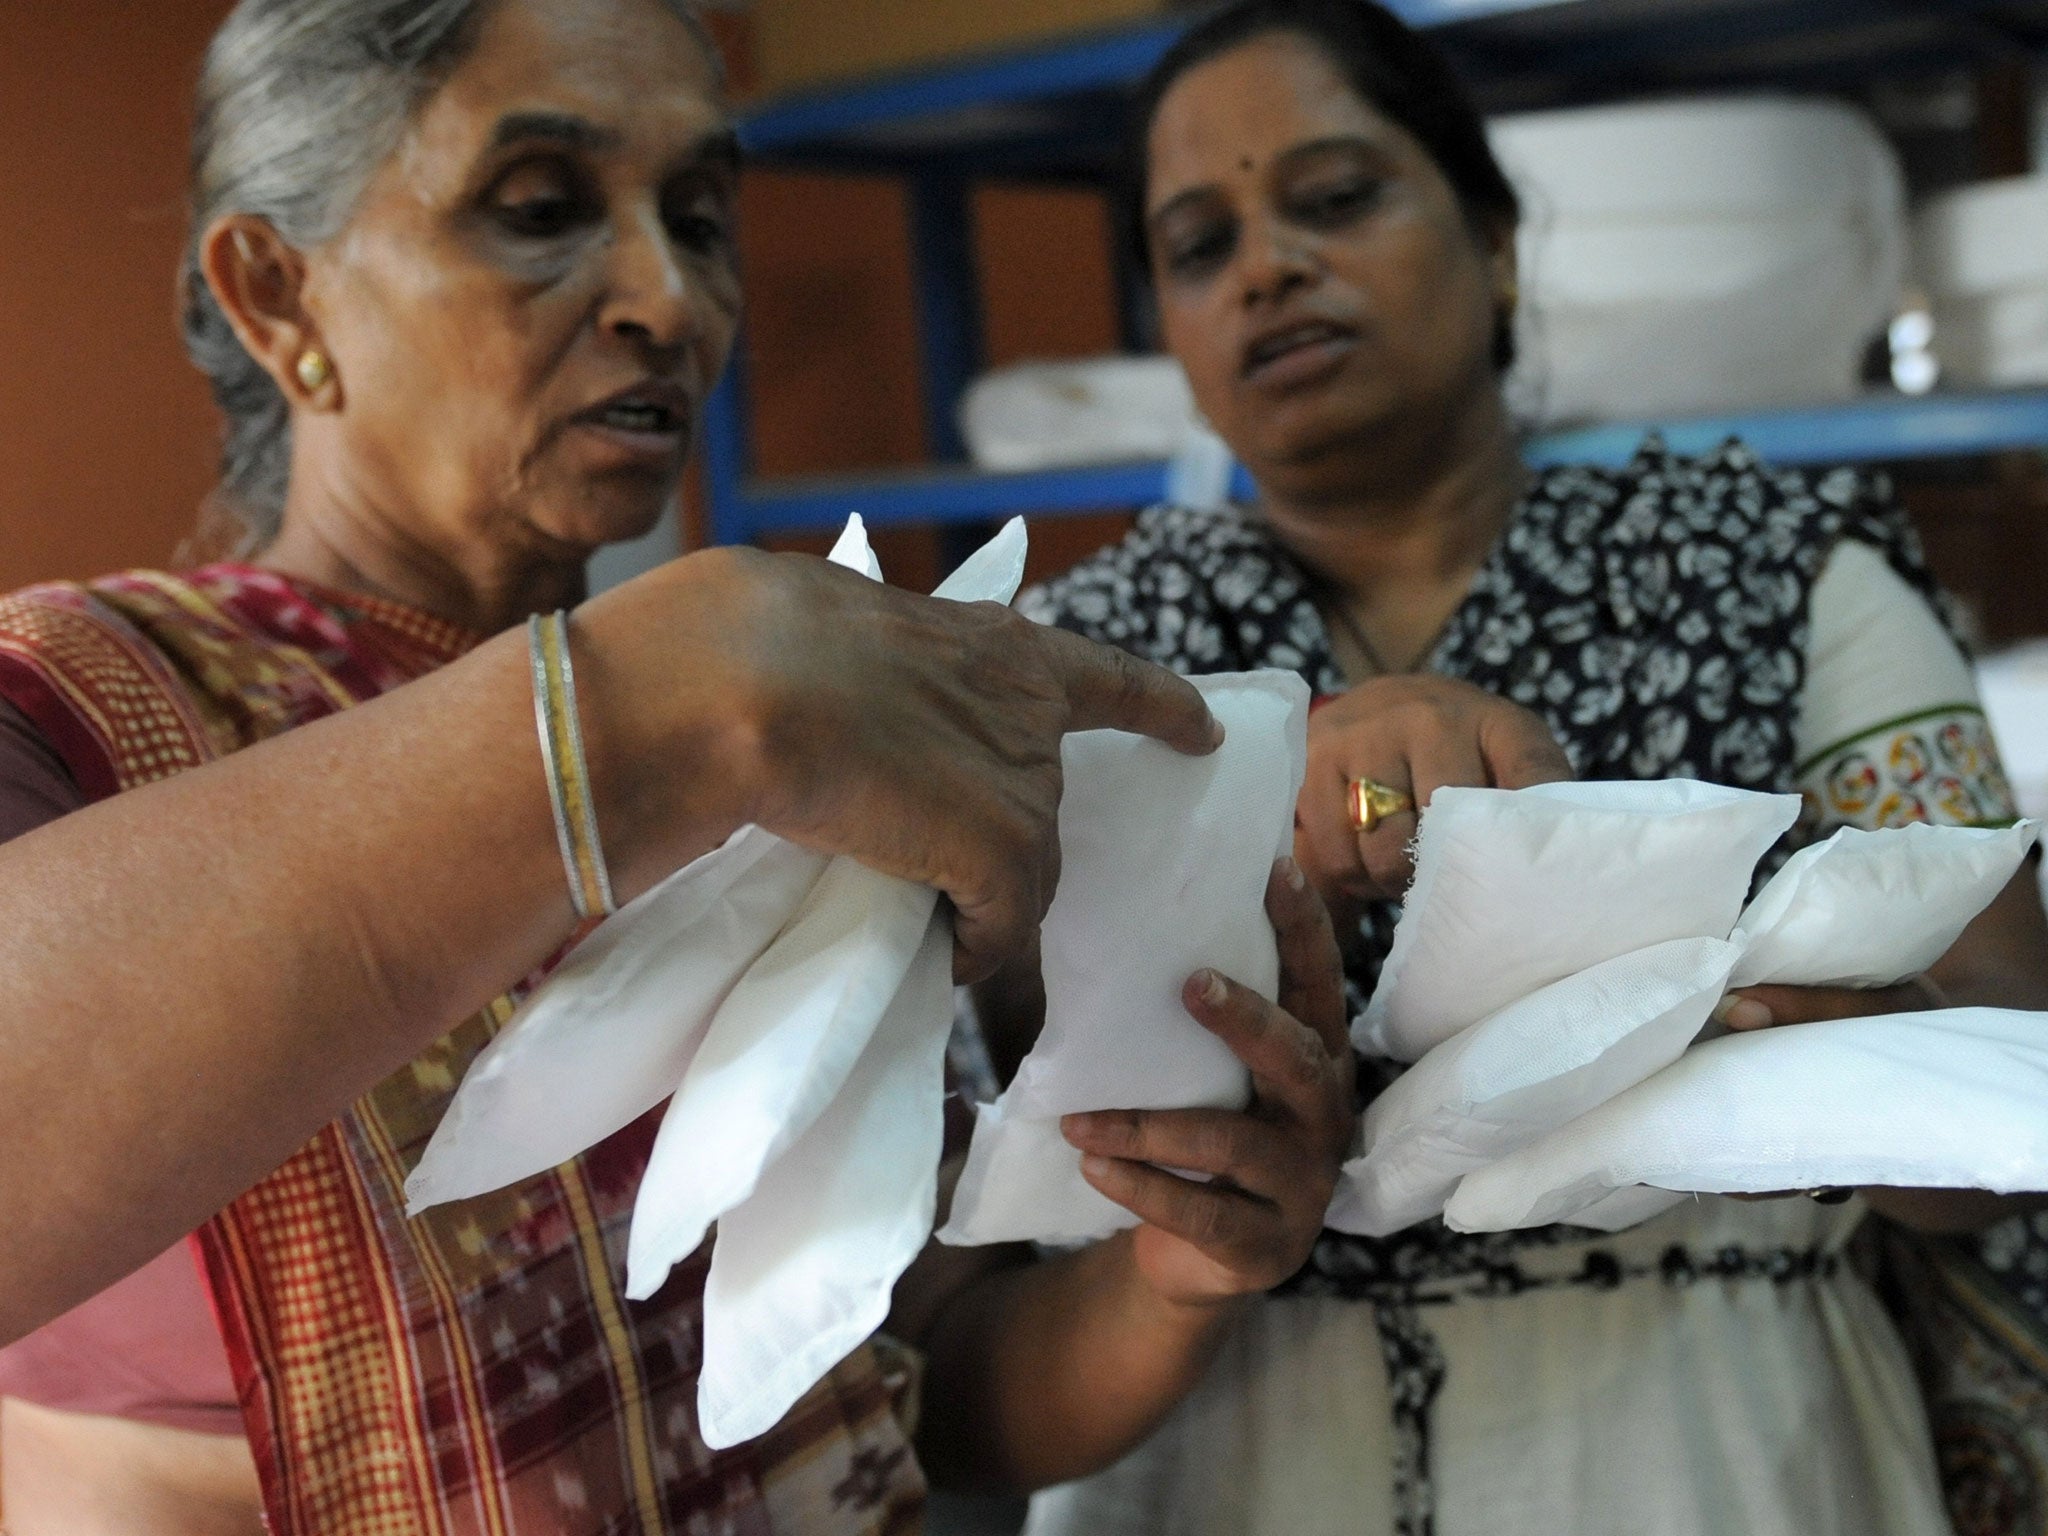 Savitaben Patel, CEO of Self Employed Women's Association (SEWA) and Assistant Project Manager, Nilam Solanki (R) check the quality of low cost sanitary pads made by members at their facility